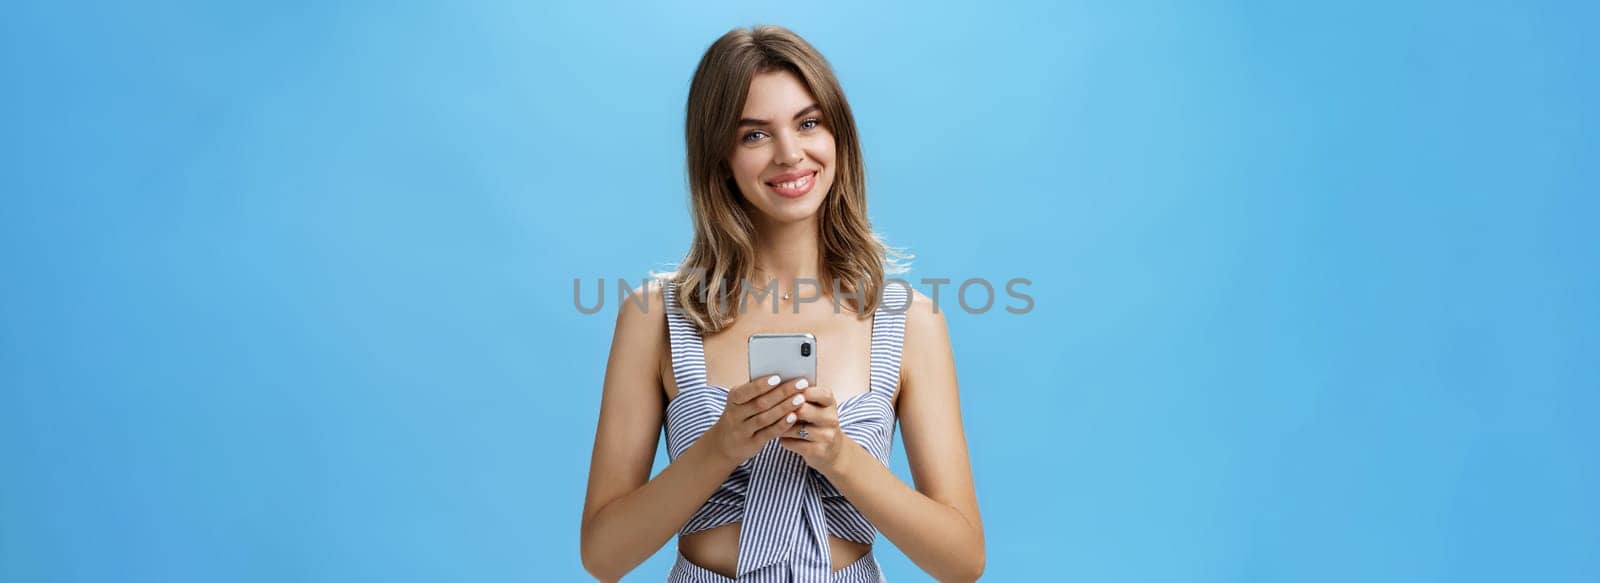 Friendly pleasant good-looking woman in matching outfit holding smartphone over chest tilting head smiling broadly showing cute gapped teeth being delighted after reading heartwarming message. Lifestyle.